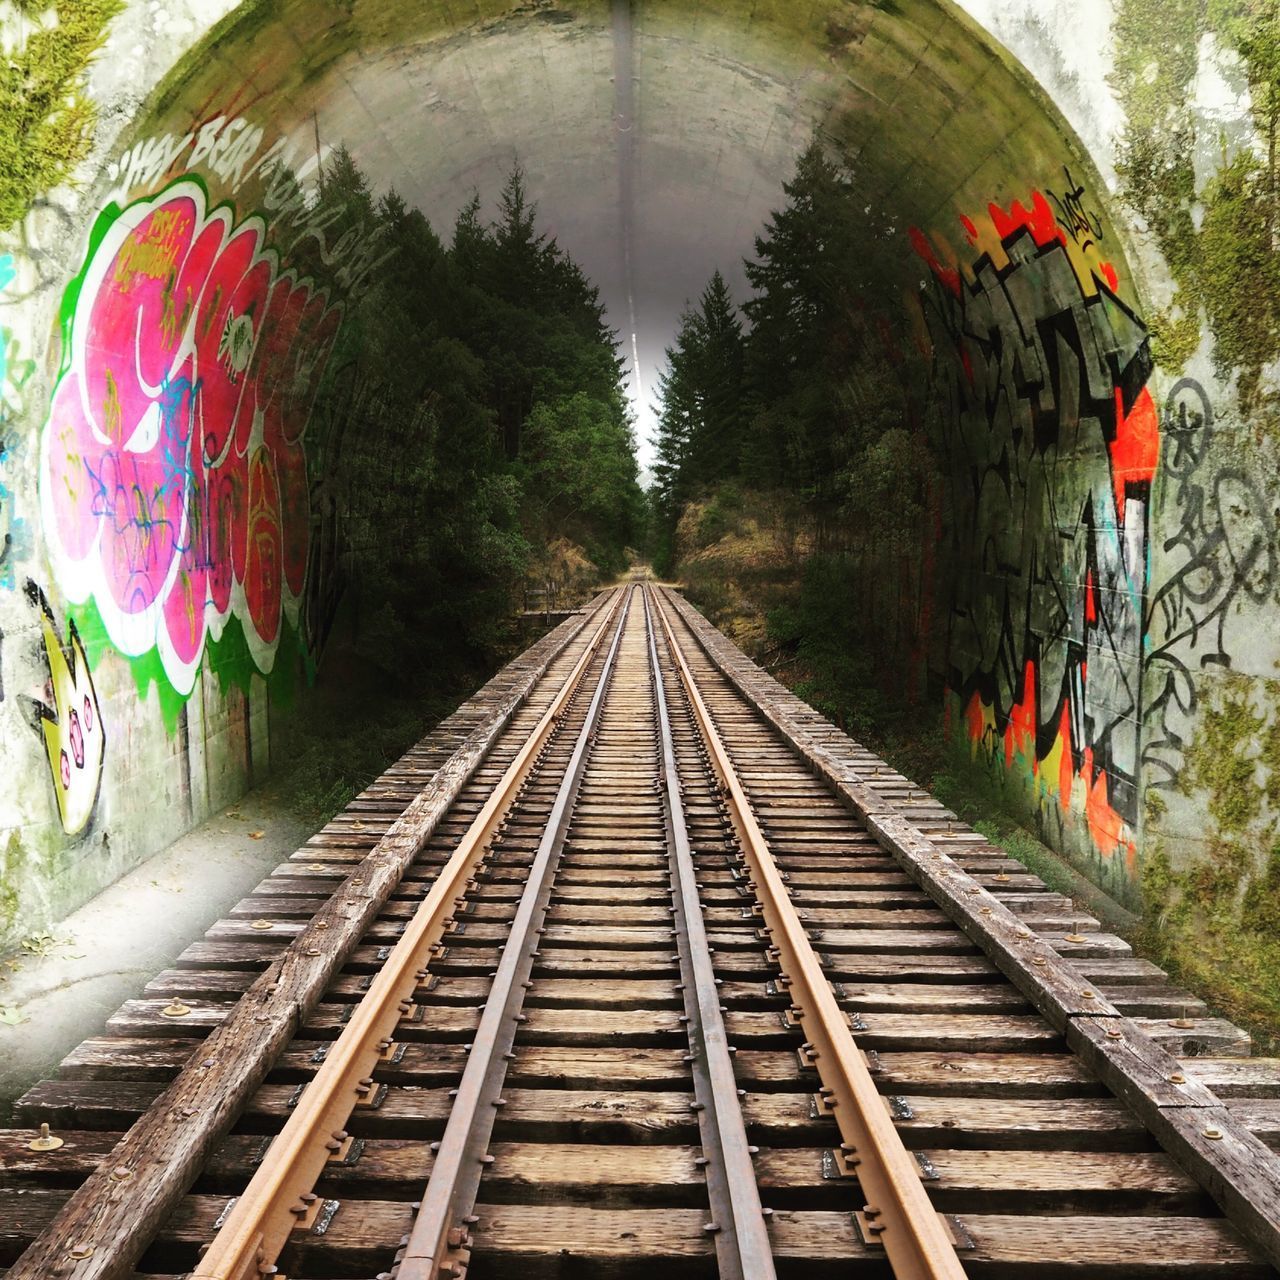 RAILROAD TRACKS AMIDST TREES AND TUNNEL